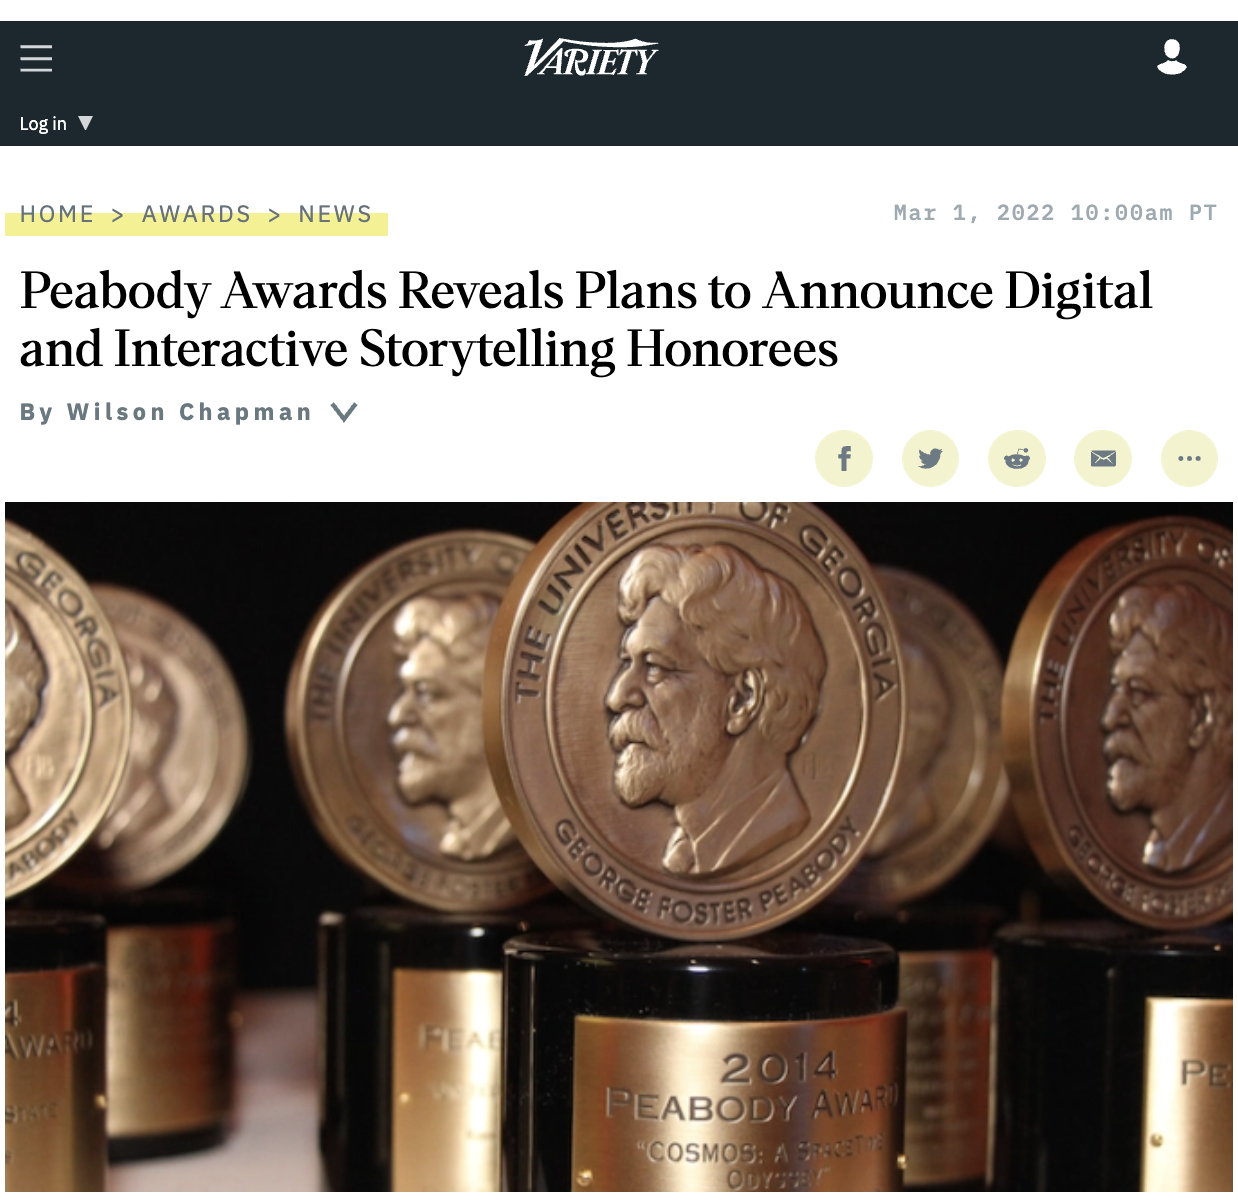 Peabody Awards Reveals Plans to Announce Digital and Interactive Storytelling Honorees